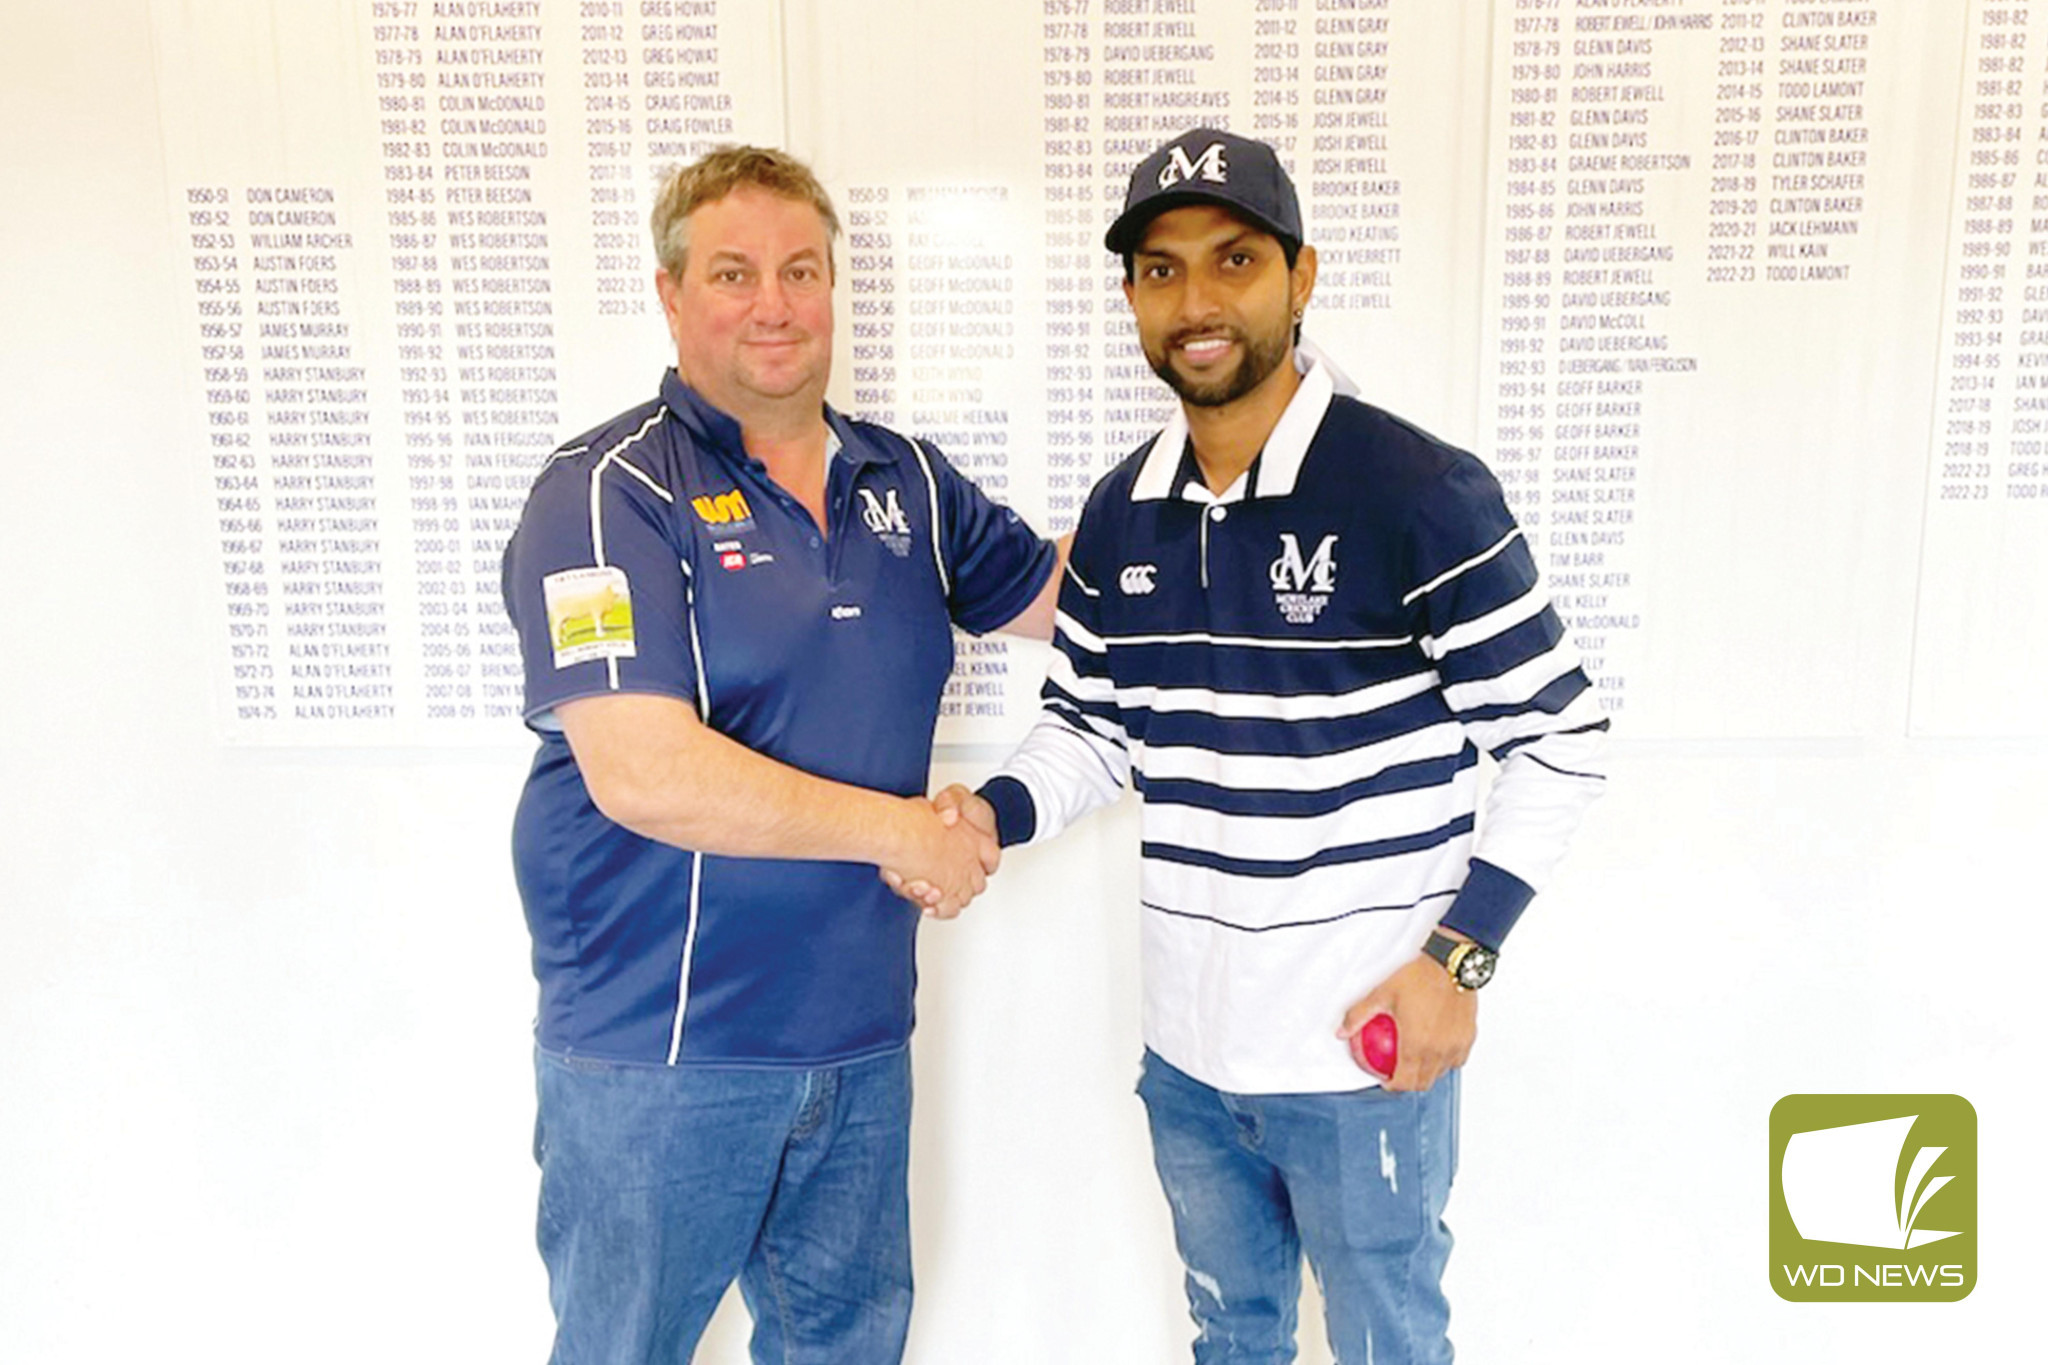 Mortlake Cricket Club president Simon Ritchie welcomes Kalhan Sineth to the Cats.